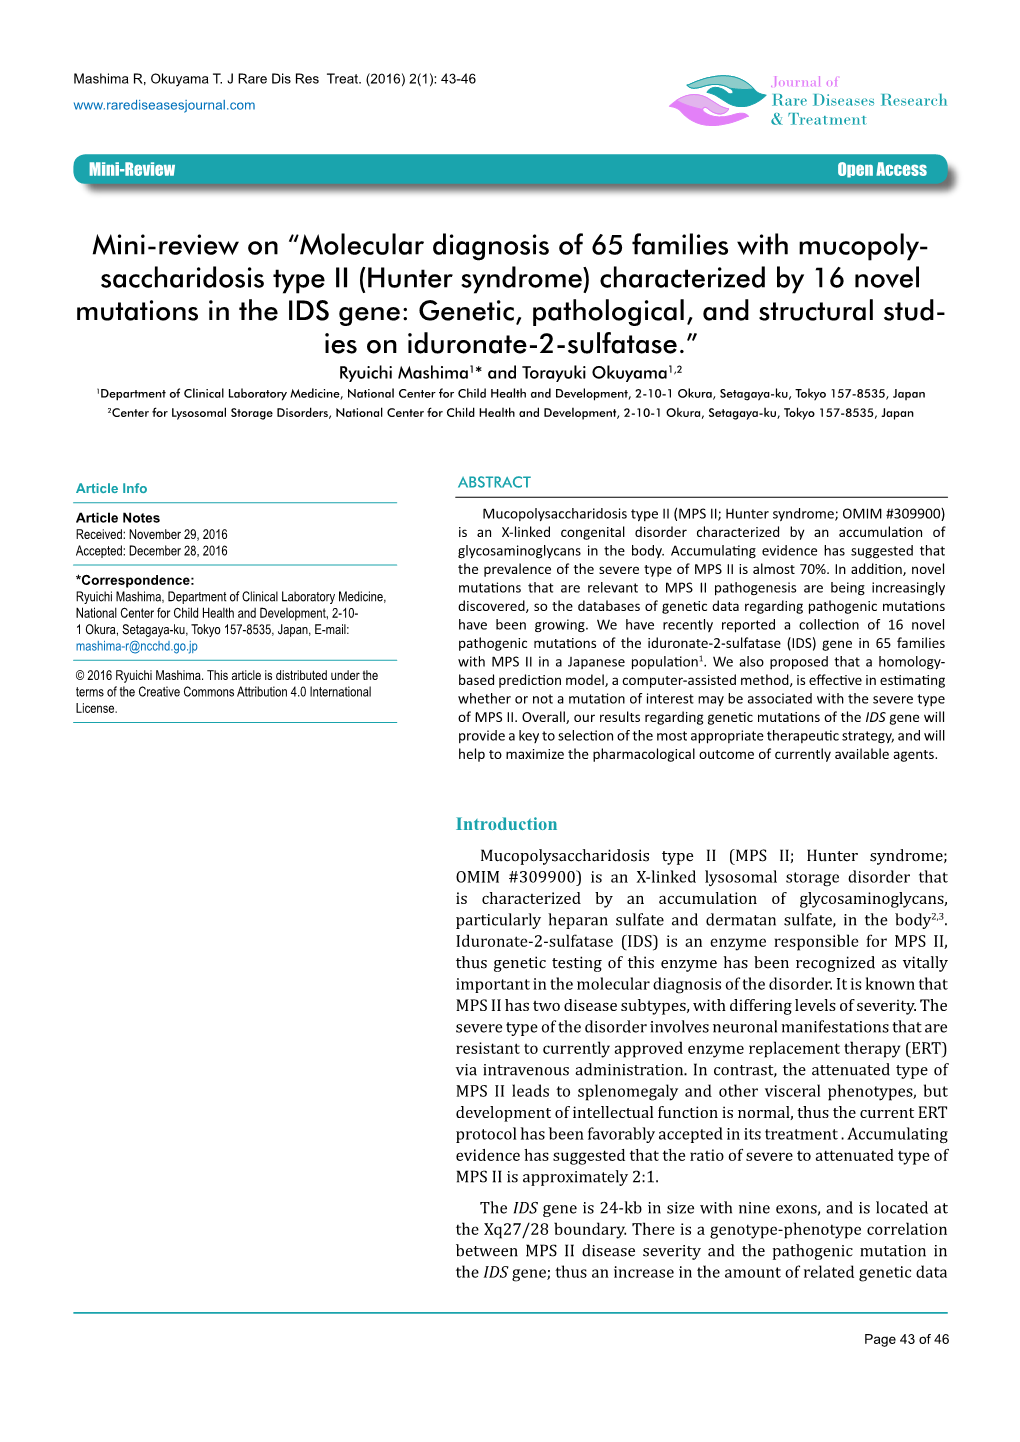 Mini-Review on “Molecular Diagnosis of 65 Families With